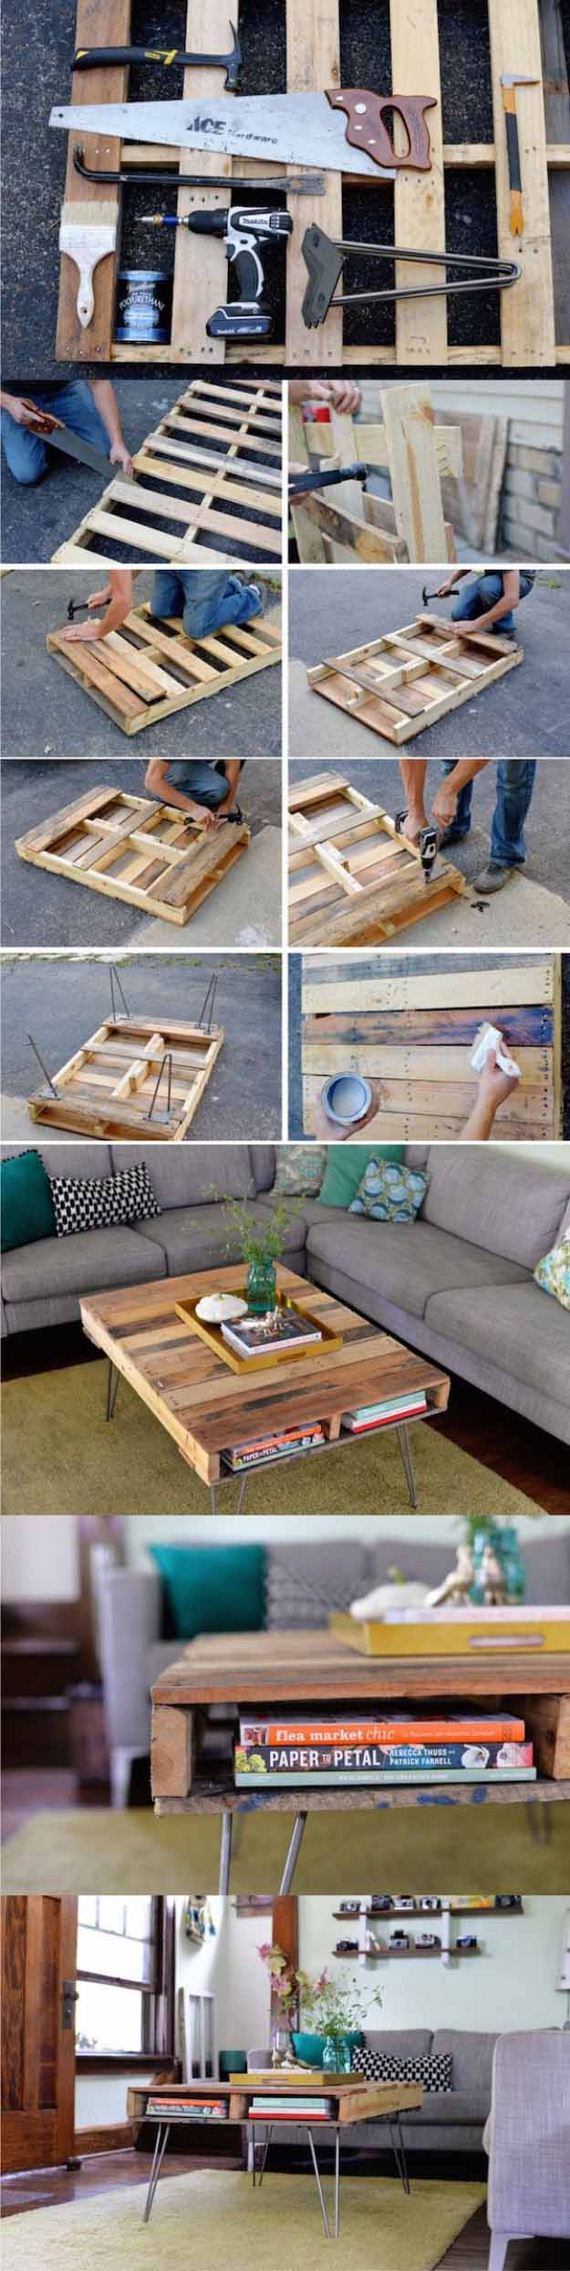 03-DIY-Coffee-Table-Projects